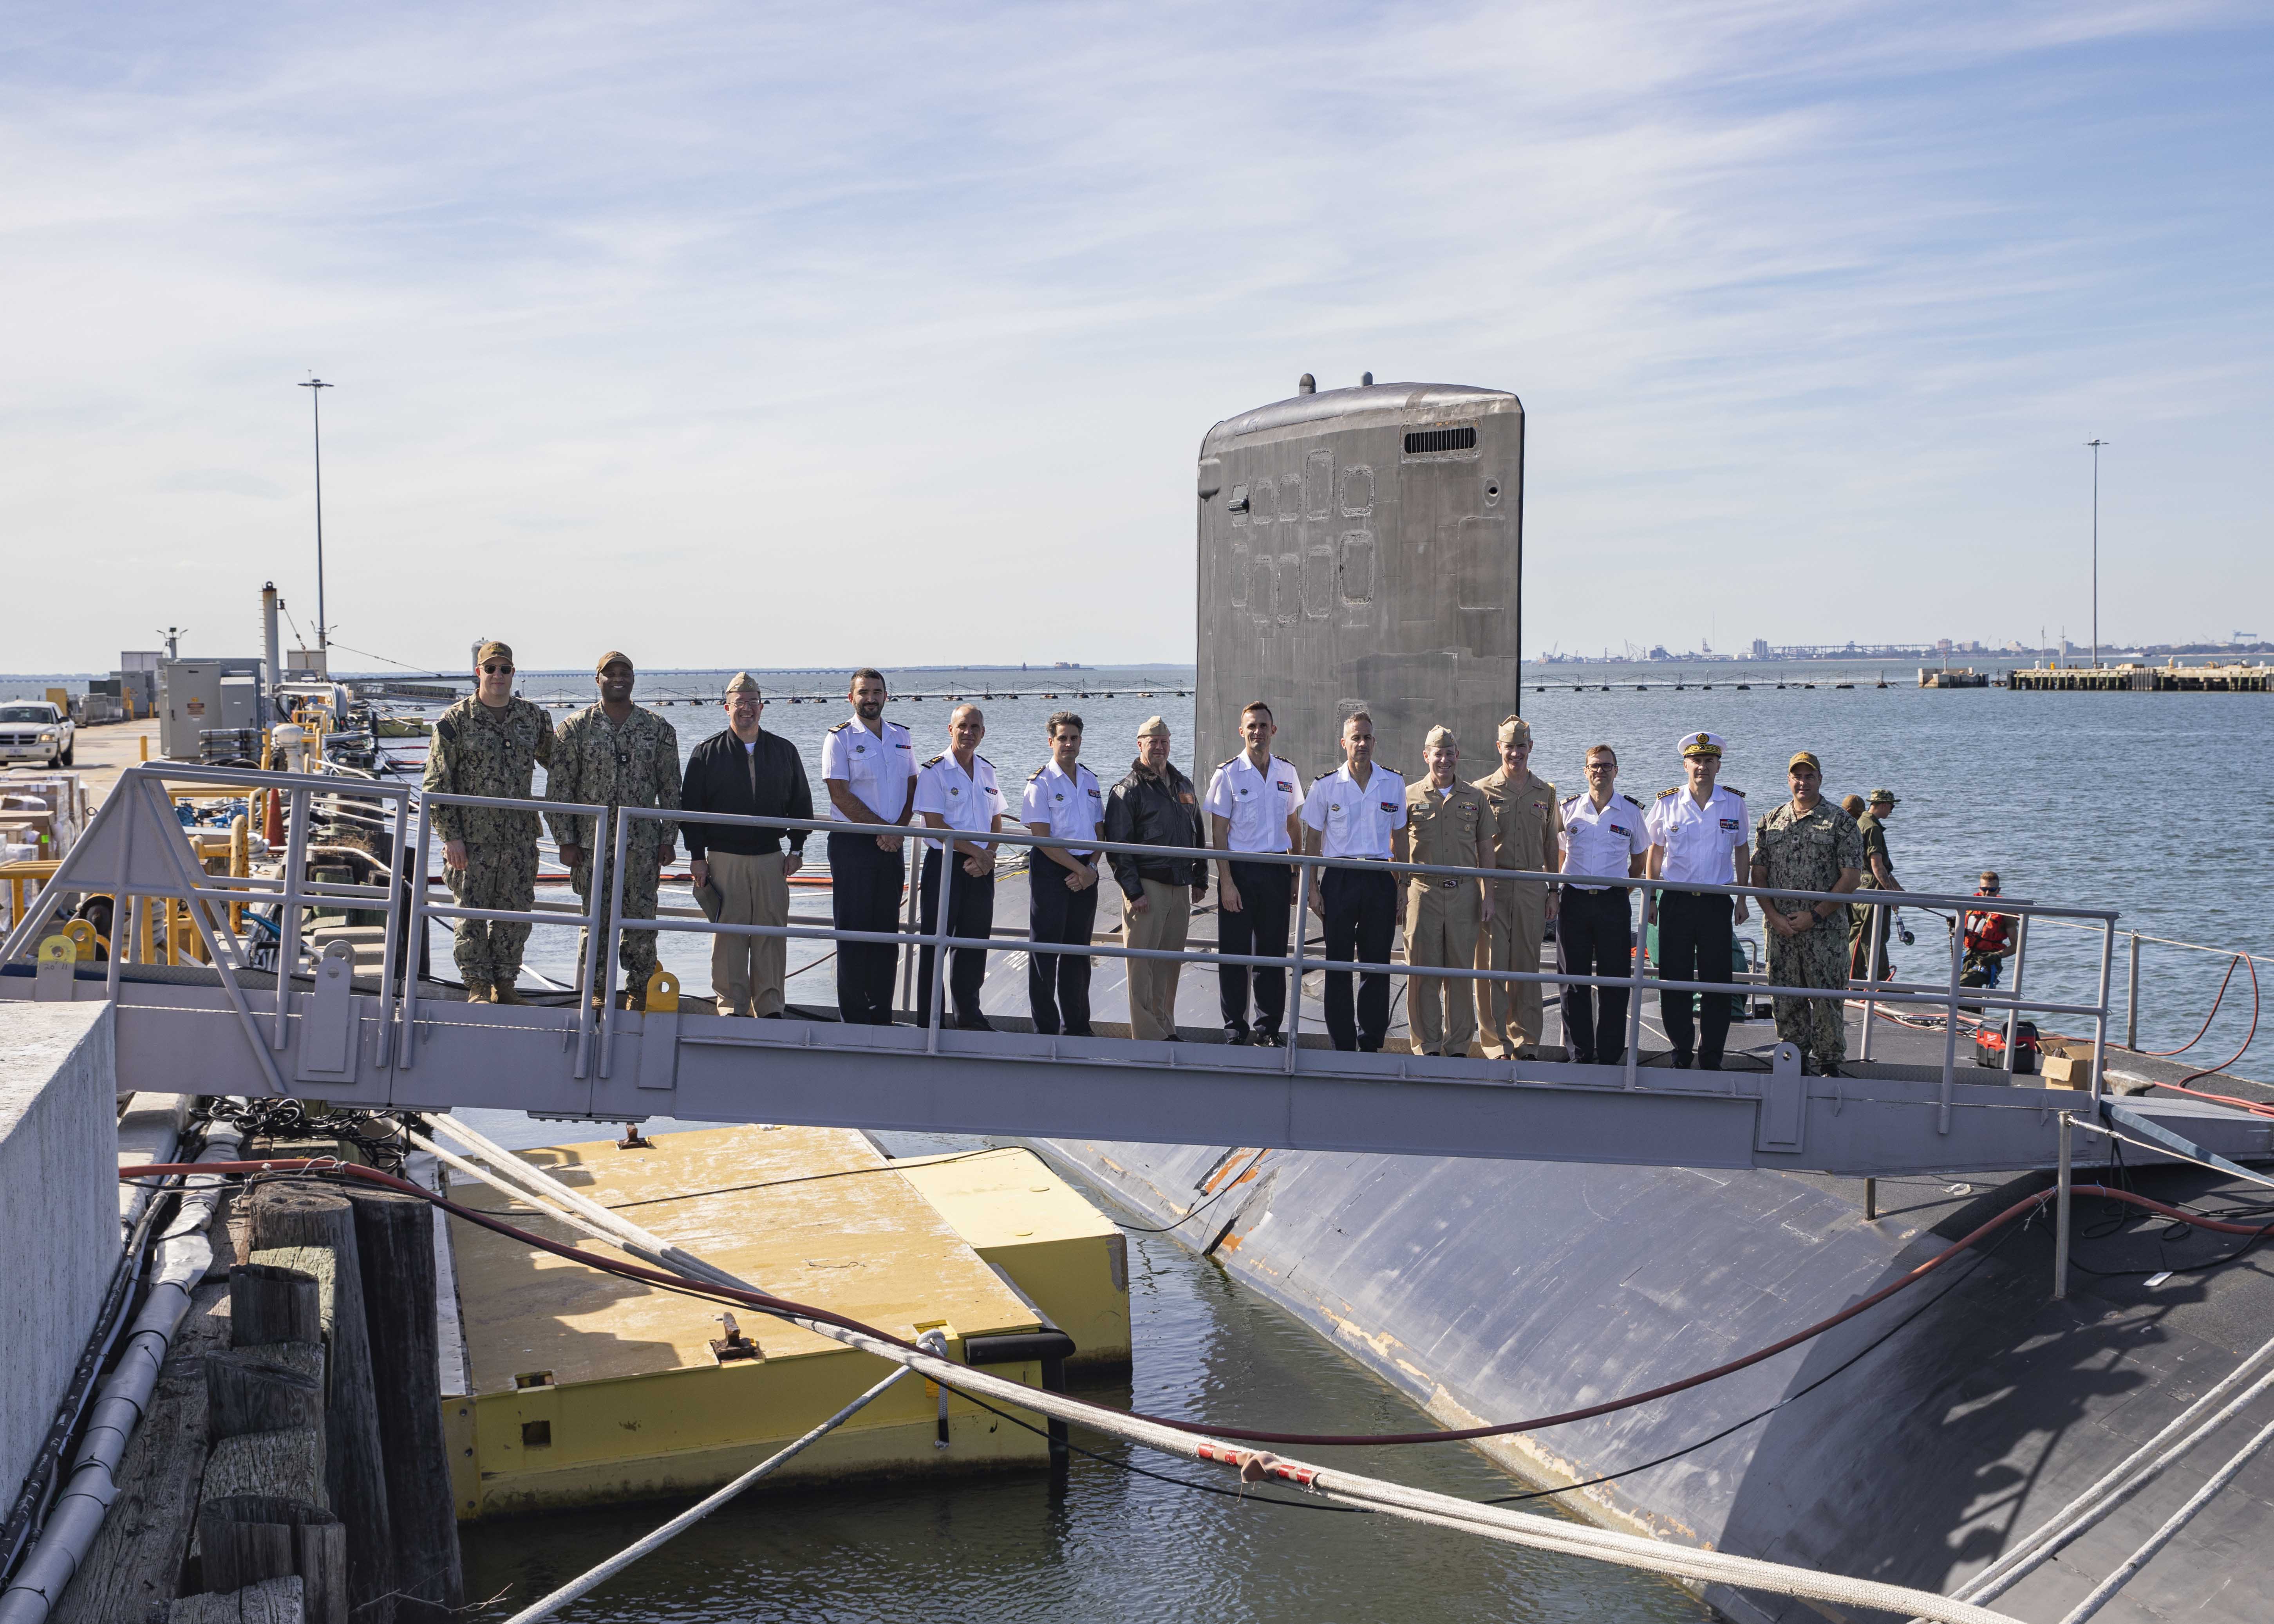 Leadership of the Virginia-class fast-attack submarine USS New Mexico (SSN 779) pose for a photo alongside U.S. and French submarine force leadership while touring the boat during a visit to Naval Station Norfolk, Oct. 11, 2022.